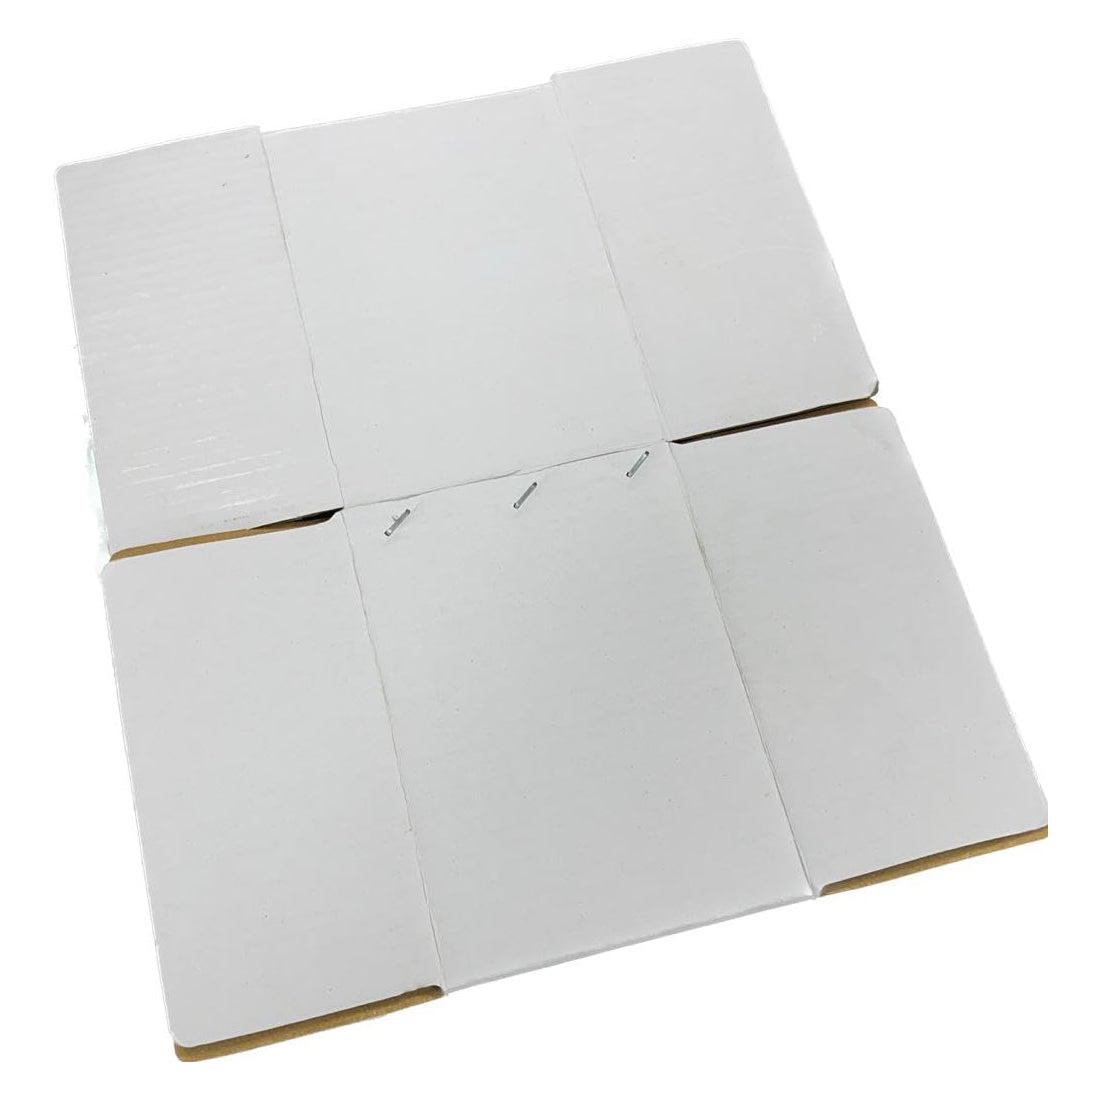 3 Ply White Corrugated Box for Packing (8X7.7X5.5 inches) - Pack of 25 Boxes